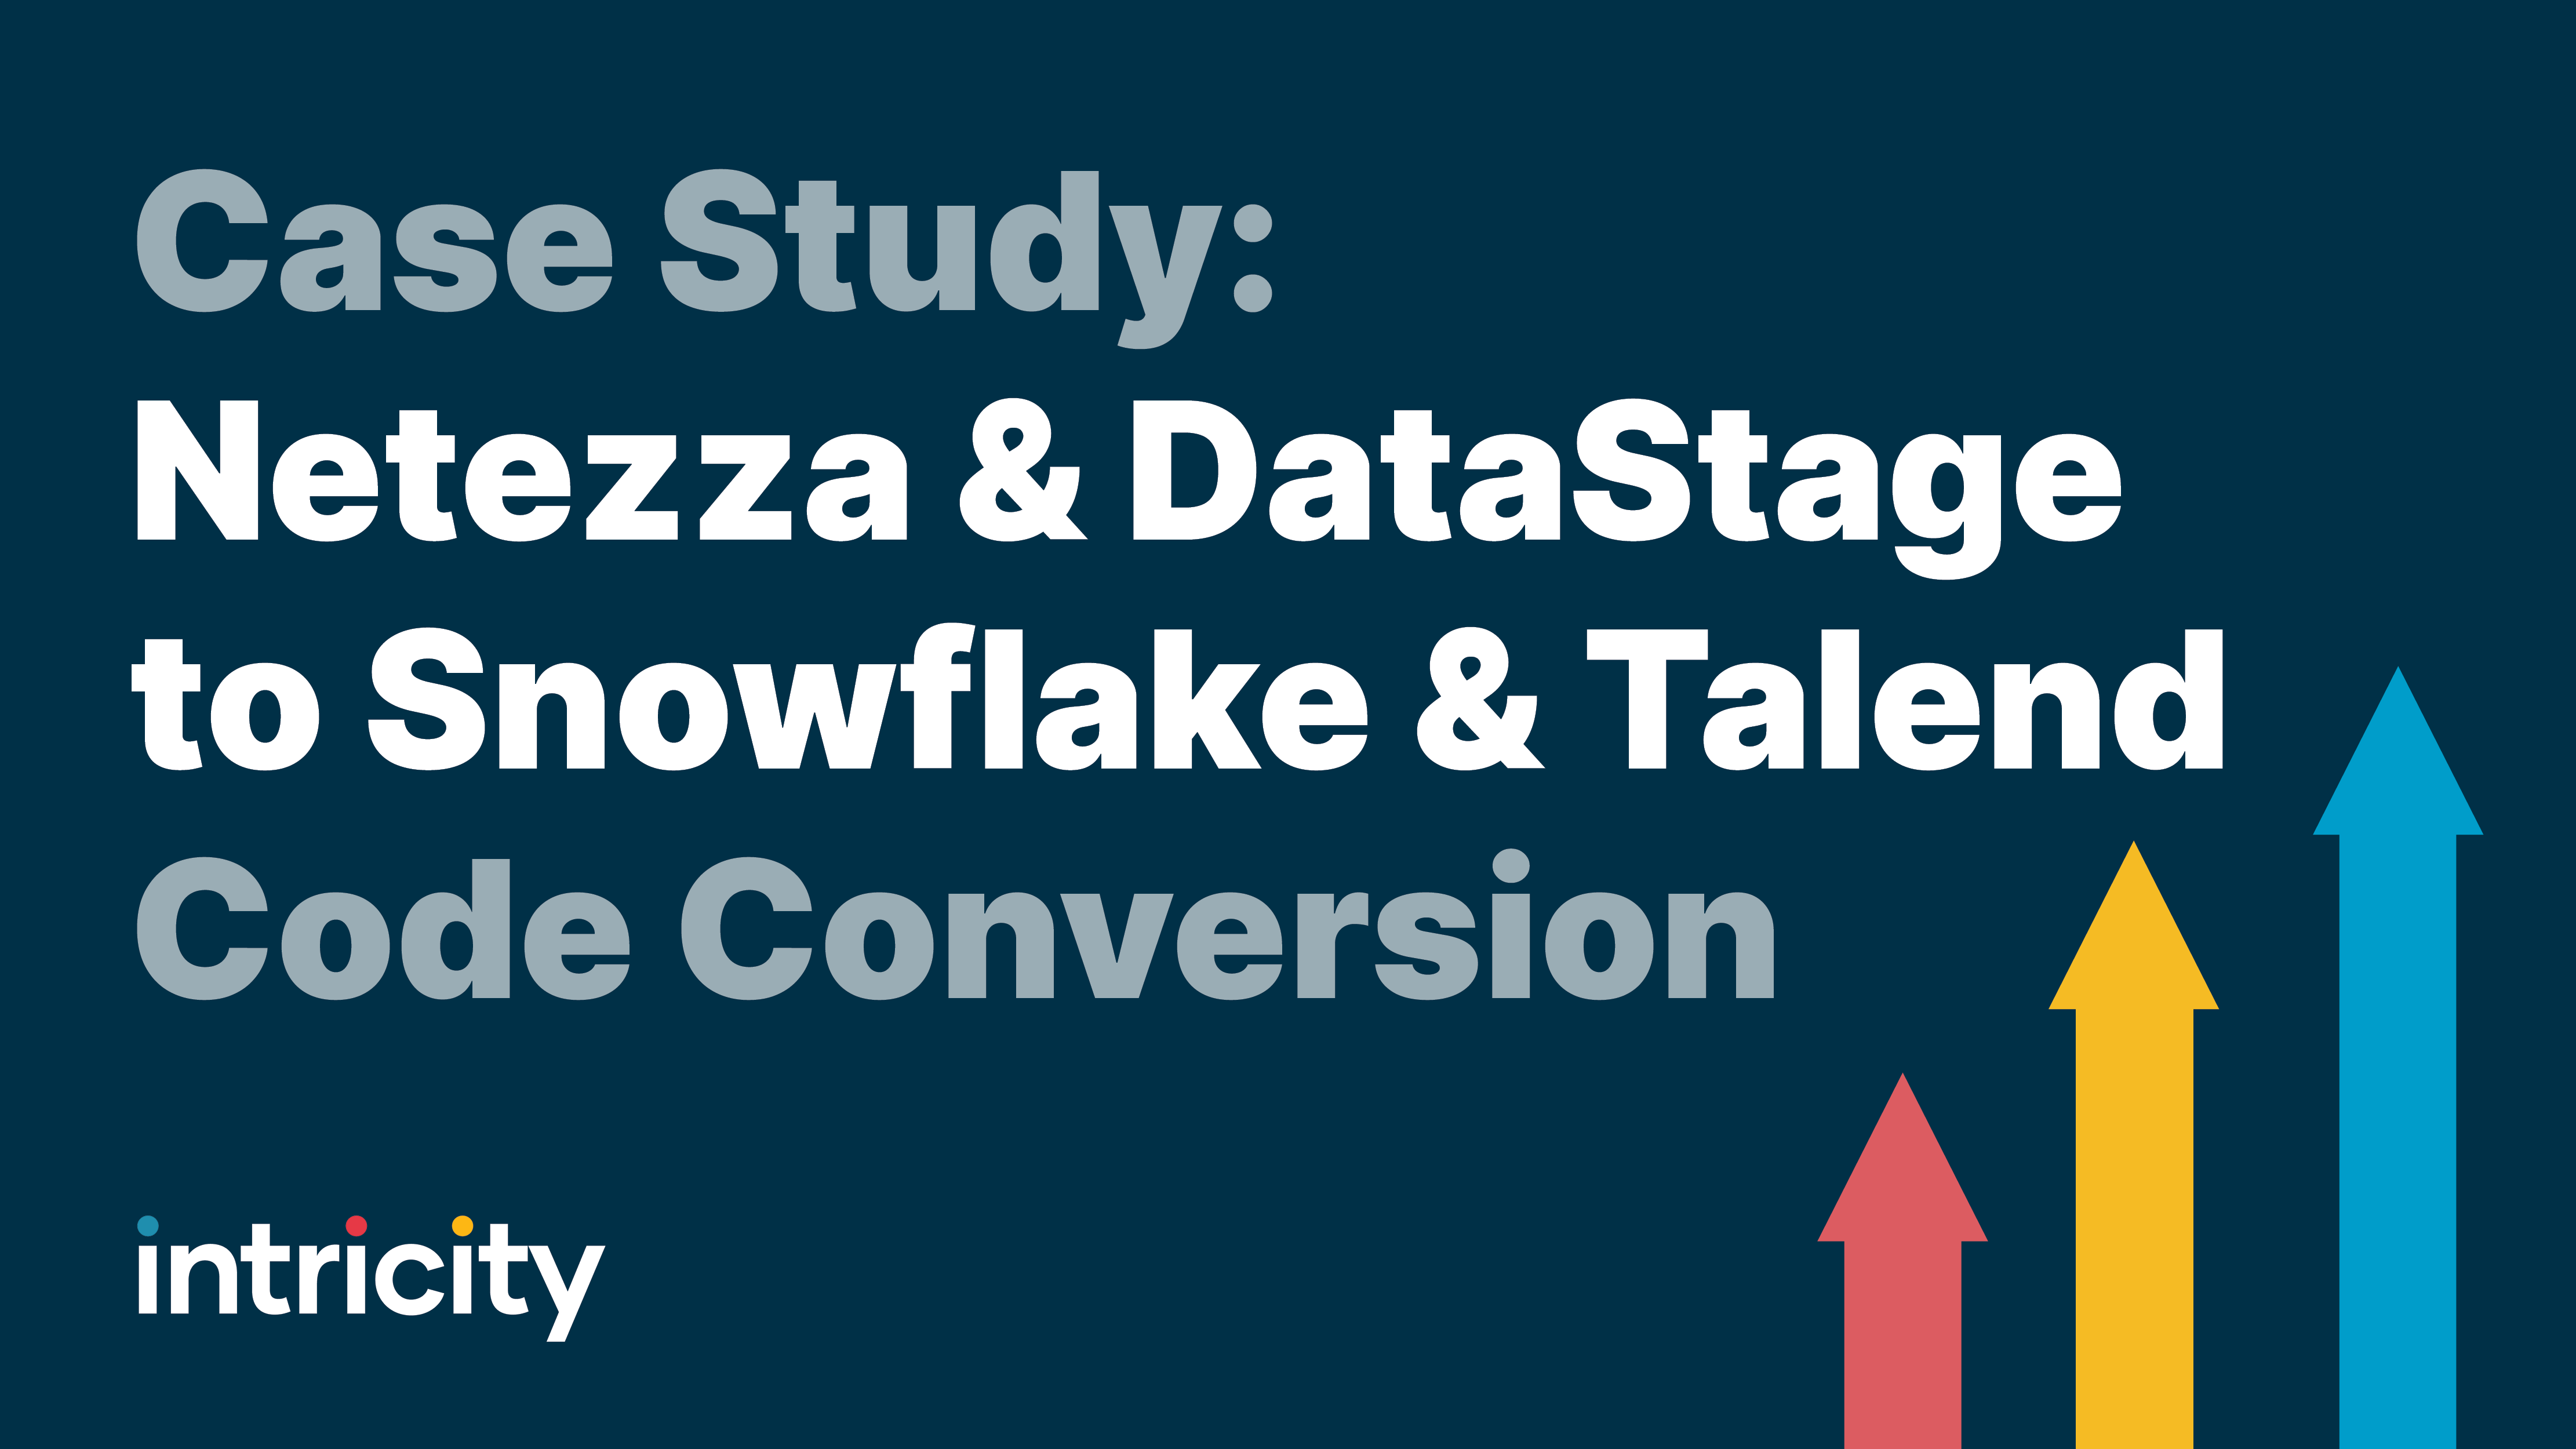 Case Study: Netezza & DataStage to Snowflake & Talend Code Conversion